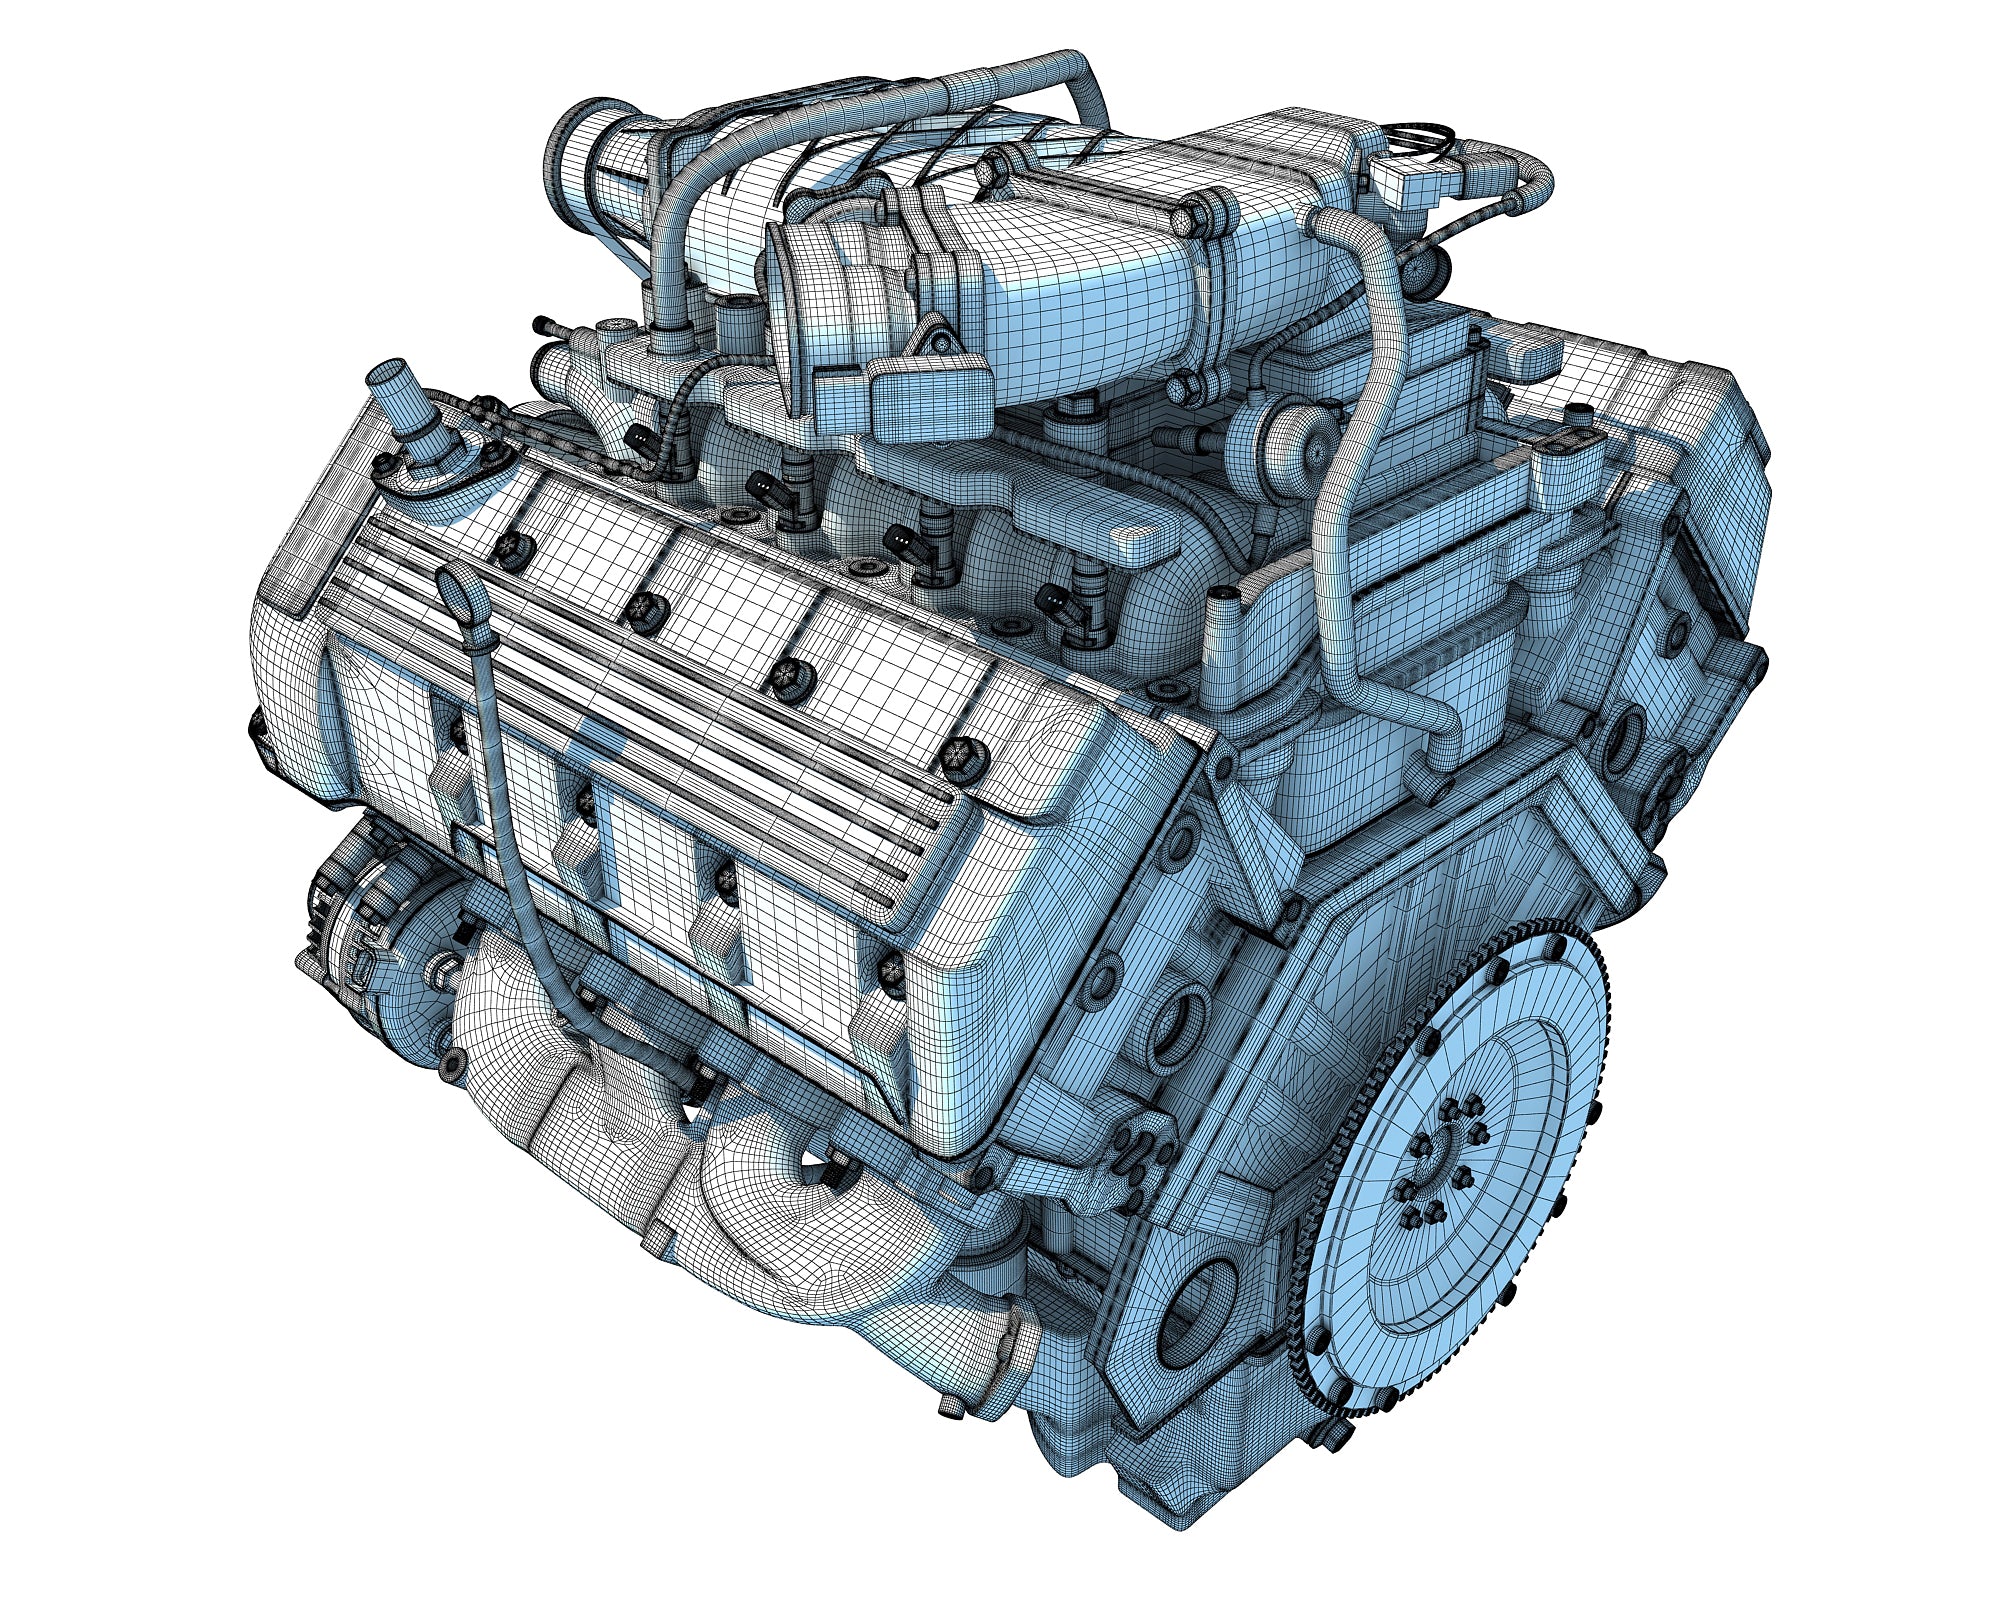 V8 engine 3d model for a wide variety of automotive projects –  TrashedGraphics